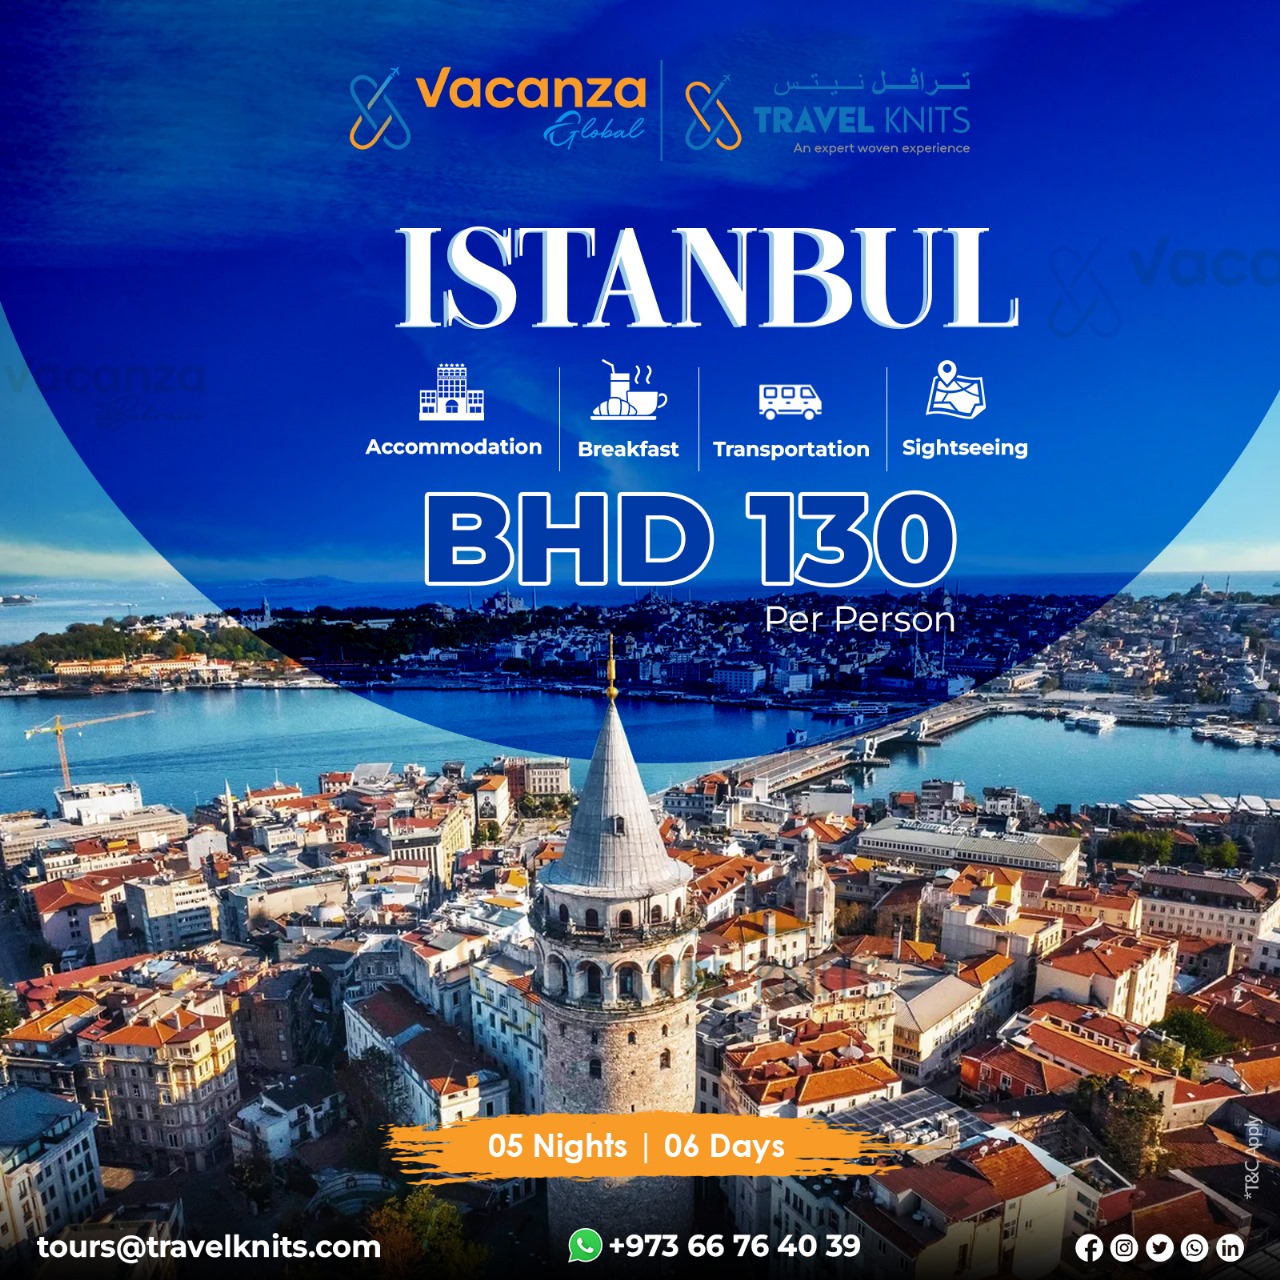 Eid holiday in Turkey|TurkeyTour Packages - Book honeymoon ,family,adventure tour packages to Turkey|Travel Knits												